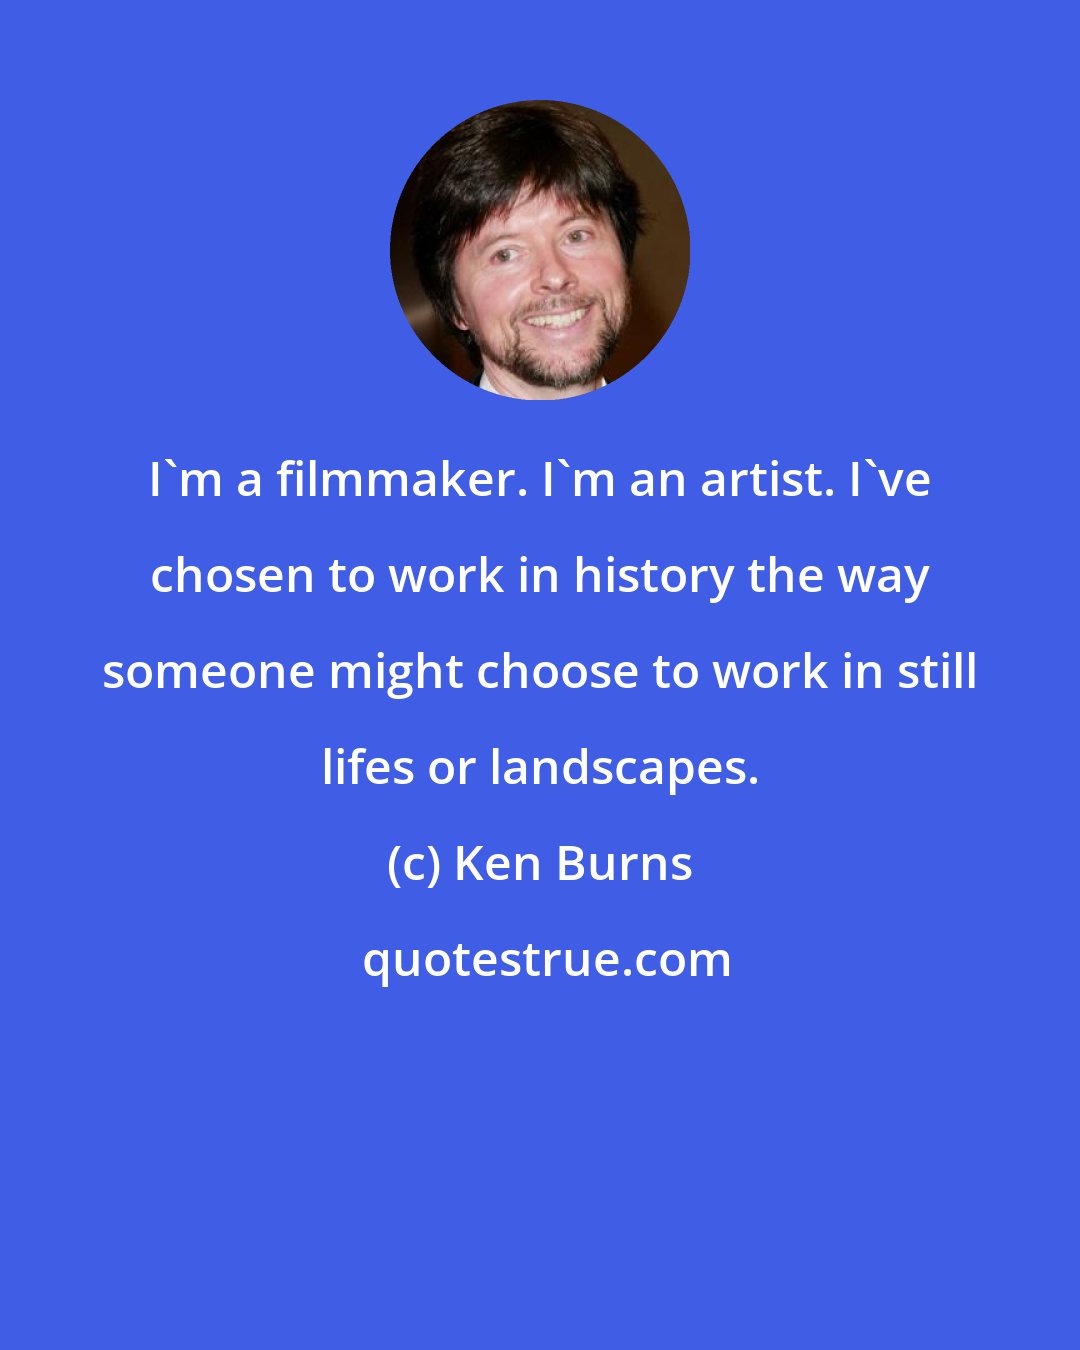 Ken Burns: I'm a filmmaker. I'm an artist. I've chosen to work in history the way someone might choose to work in still lifes or landscapes.